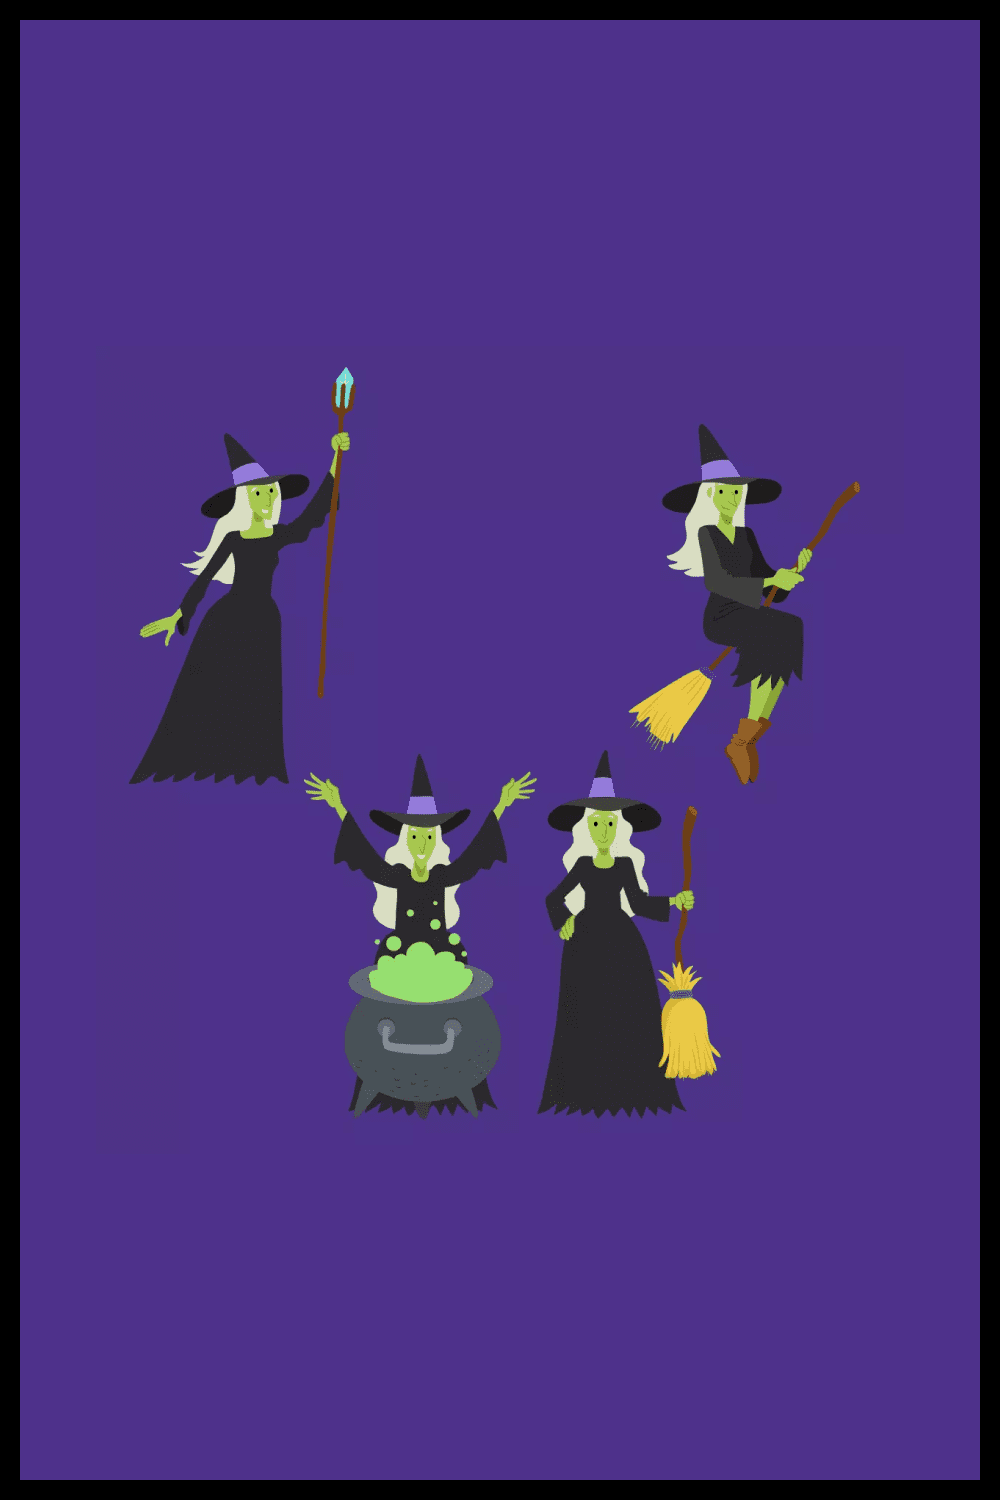 Collage of images of witches on a purple background.